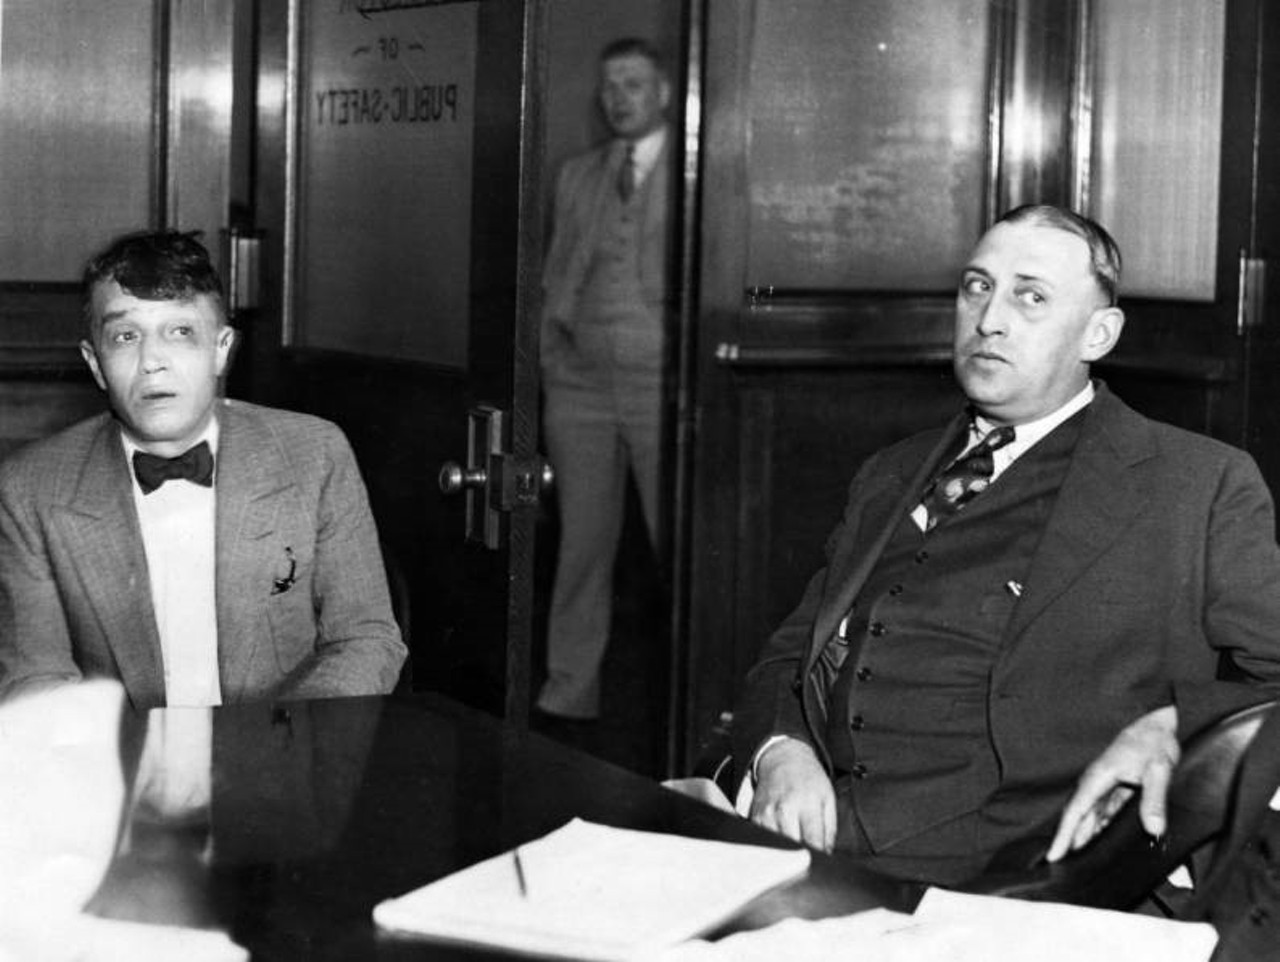 Left to right are Angelo Porrello and Walter Wingate. Porrello was a corn sugar racketeer in Cleveland who survived a prohibition clan feud in the 1920s and 1930s that saw four of his brothers die. He was later convicted of first-degree murder in the death of a former bootlegging partner, Joseph Smeraldi, who was a paroled convict. Common Pleas Judges Frank J. Merrick, Alva R. Corlett and Samuel E. Kramer did not recommend mercy for Porrello, according to a Cleveland Plain Dealer article.